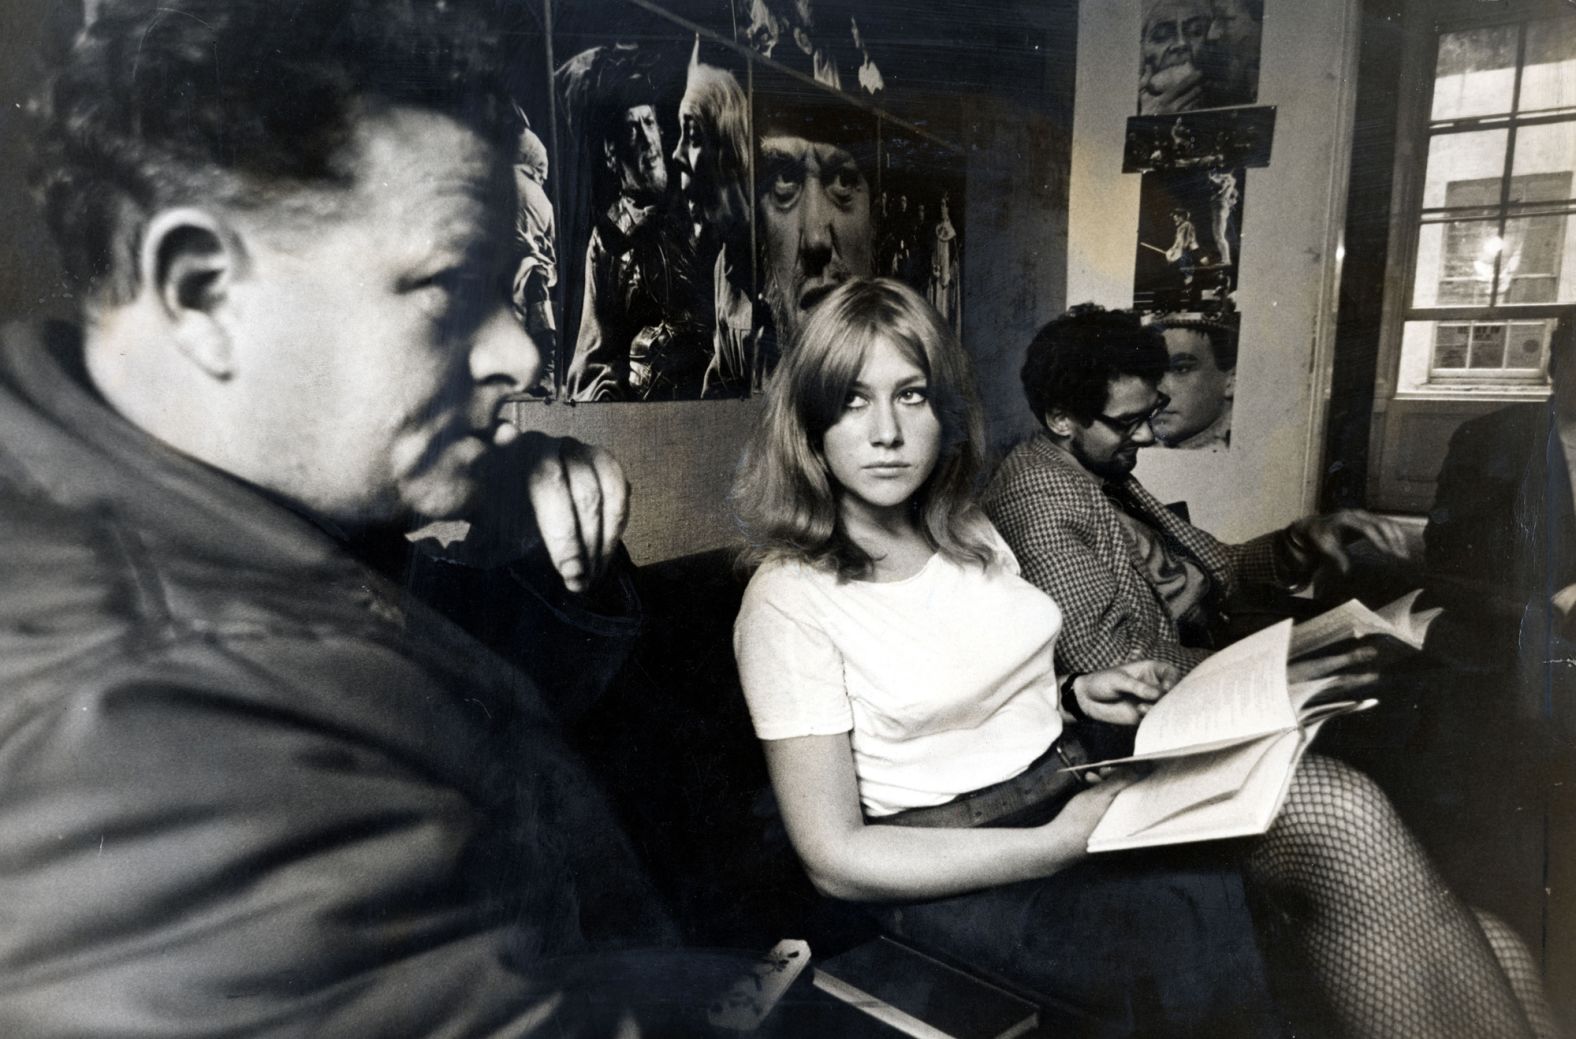 A young Mirren participates in a reading for the play "Antony and Cleopatra" with Michael Croft, left, and John Nightingale in 1965.